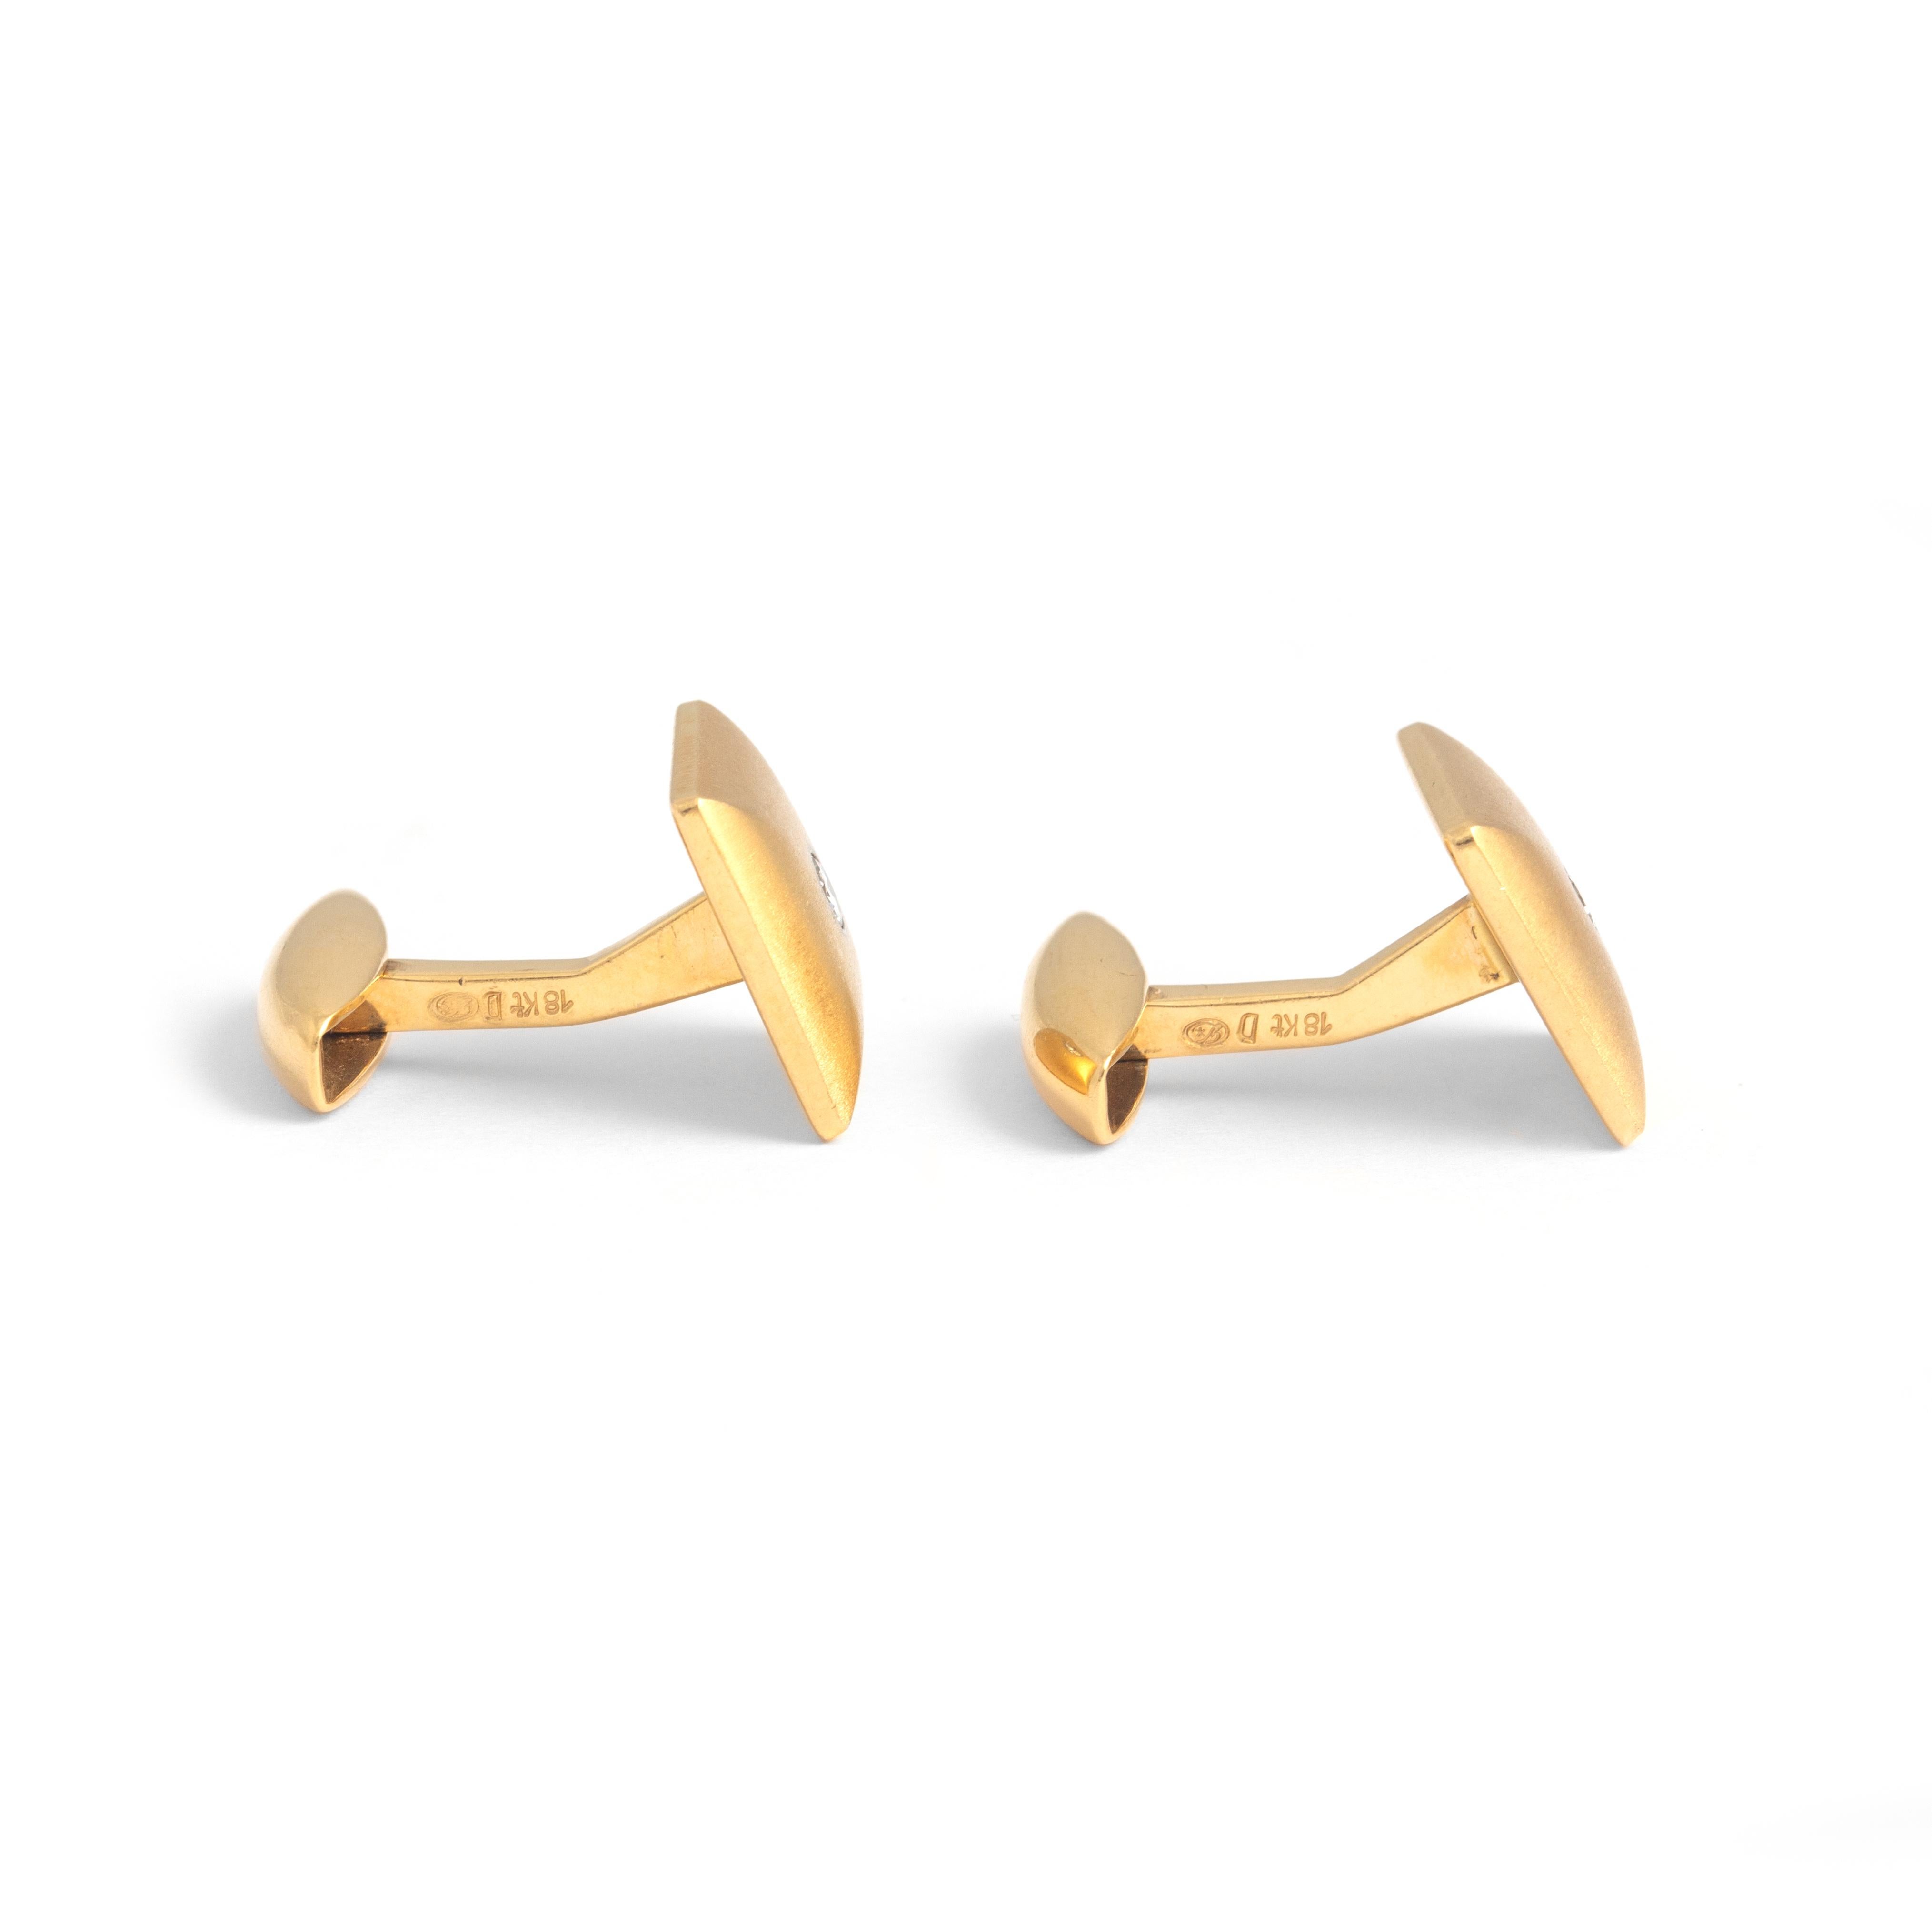 Vintage Diamond Yellow Gold 18K Cufflinks.

Dimensions: 1.30 x 1.30 centimeters.
Total length: 2.10 centimeters.

Total weight: 21.88 grams.